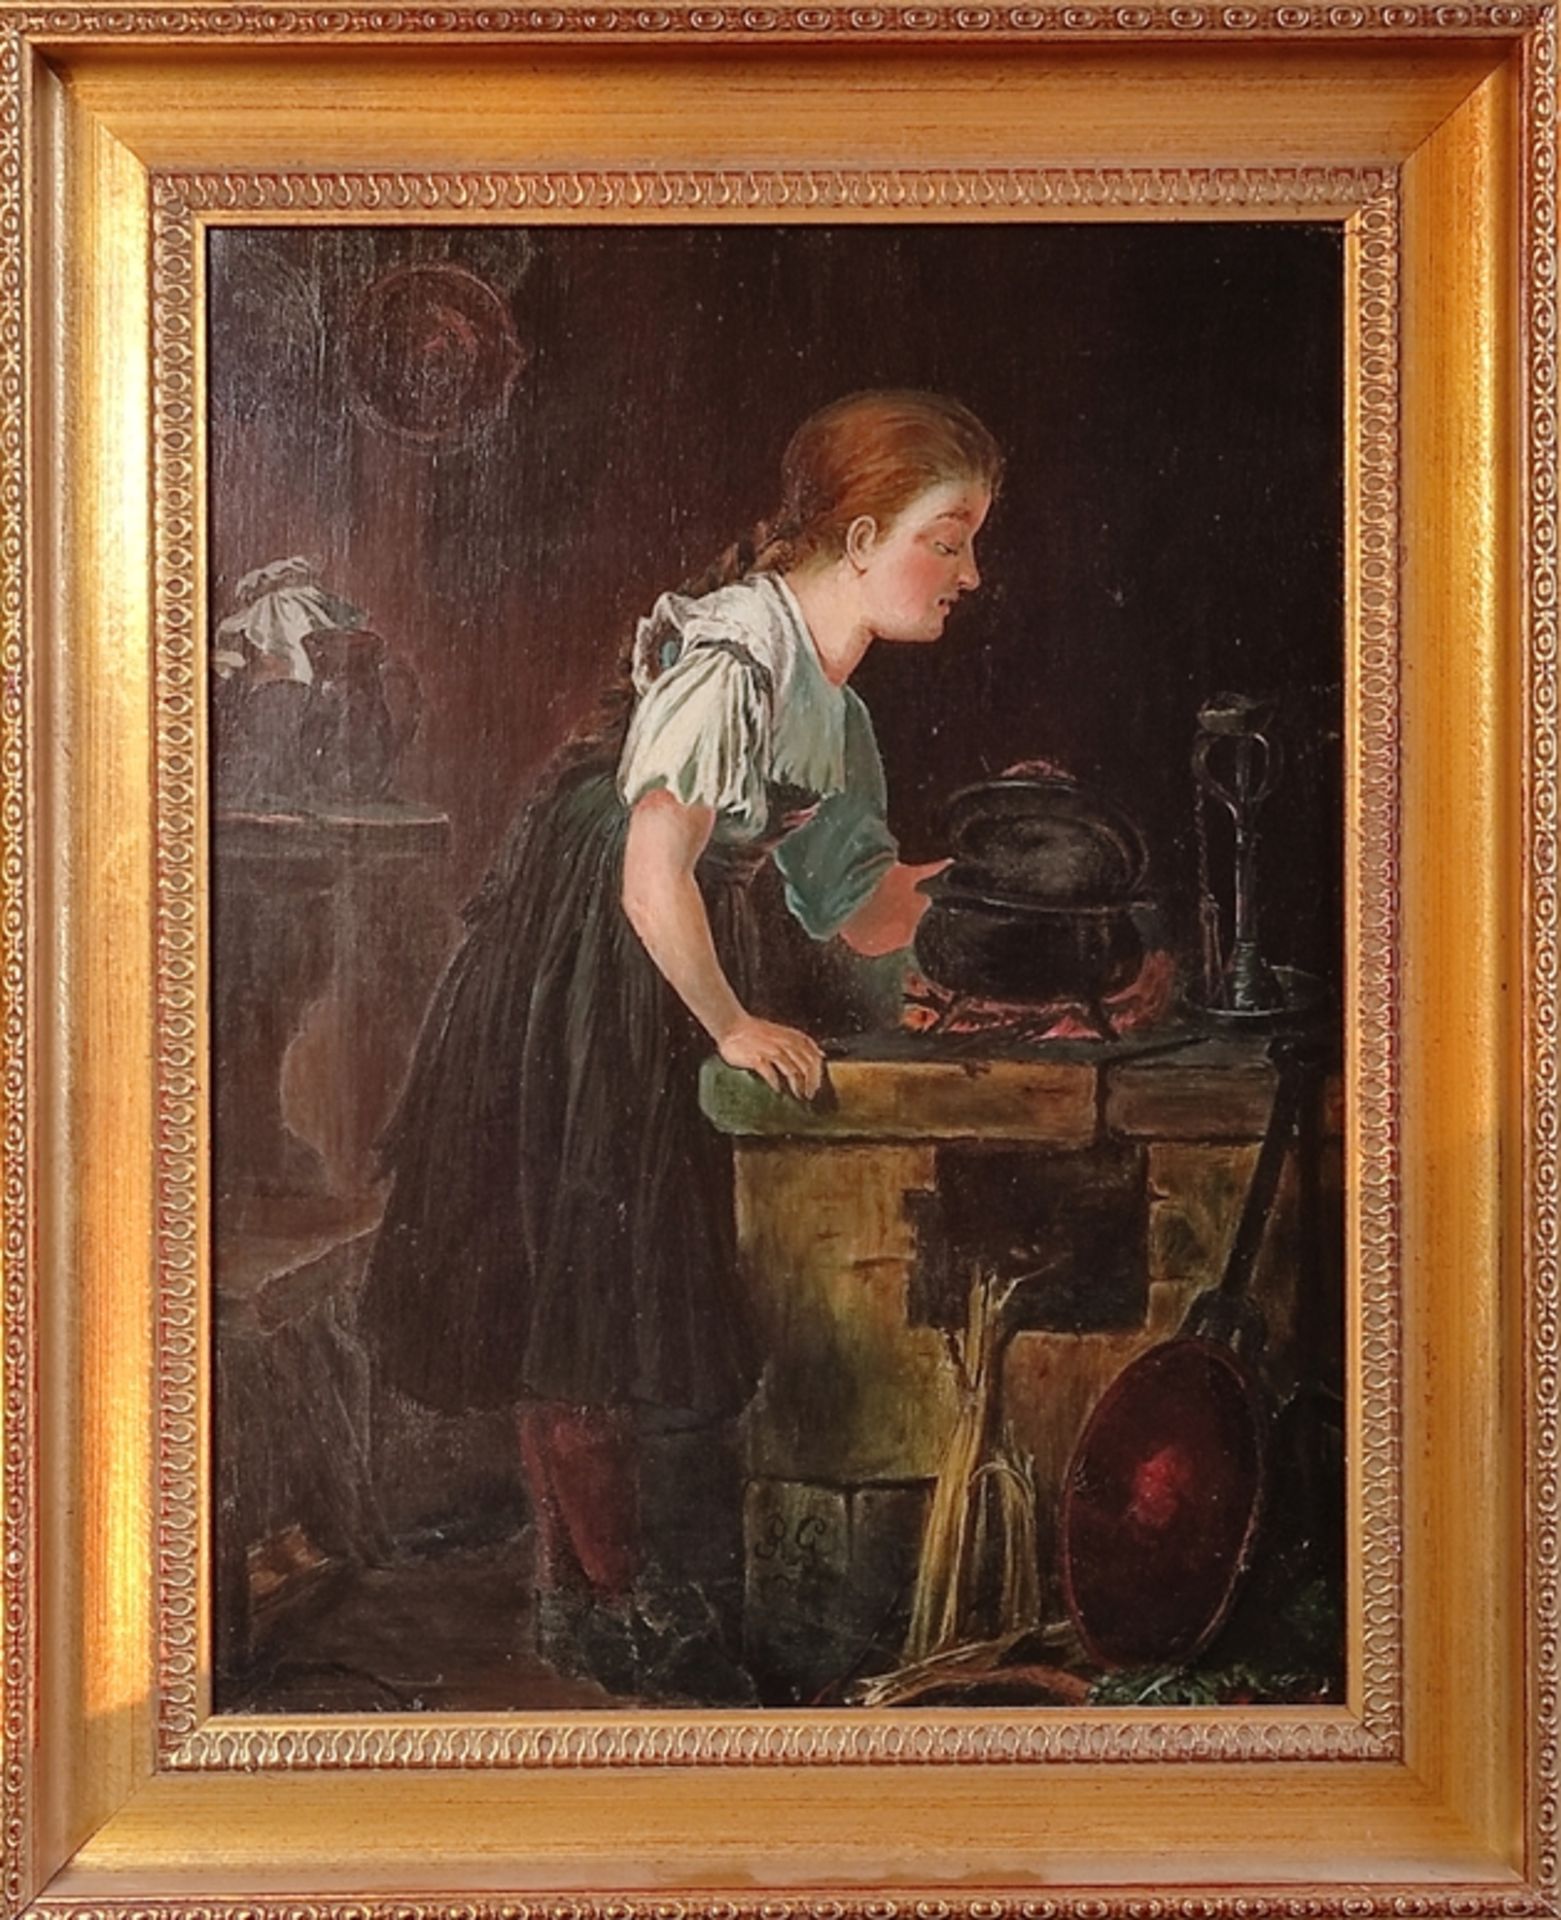 Monogramist (19th century) "At the stove", young woman looking into a pot, oil on canvas, monogramm - Image 2 of 4